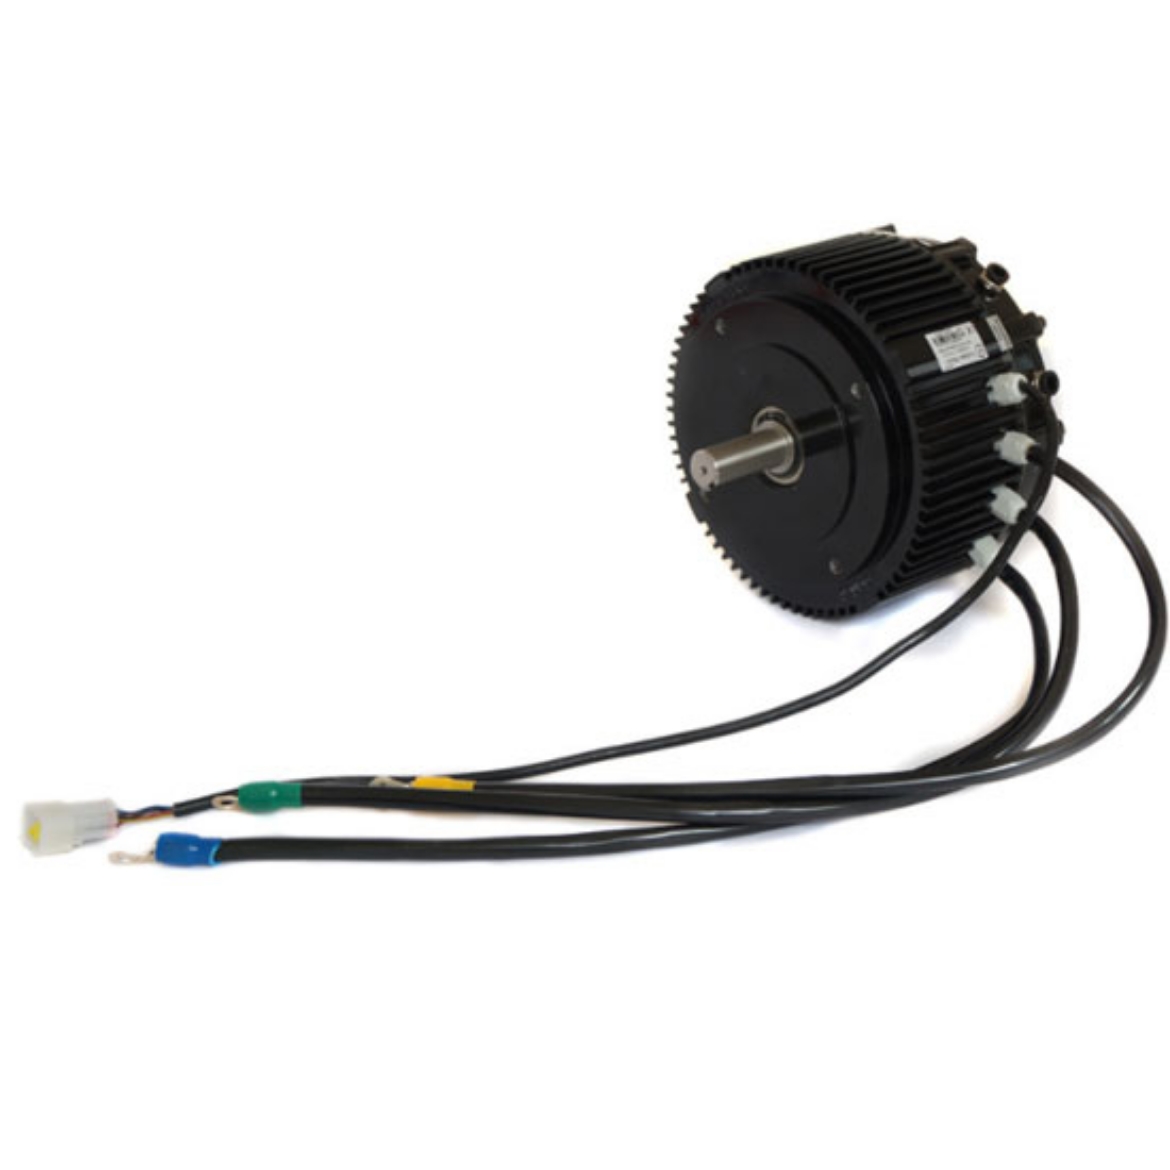 5kW BLDC Motor For Electric Vehicle, Air Cooling 